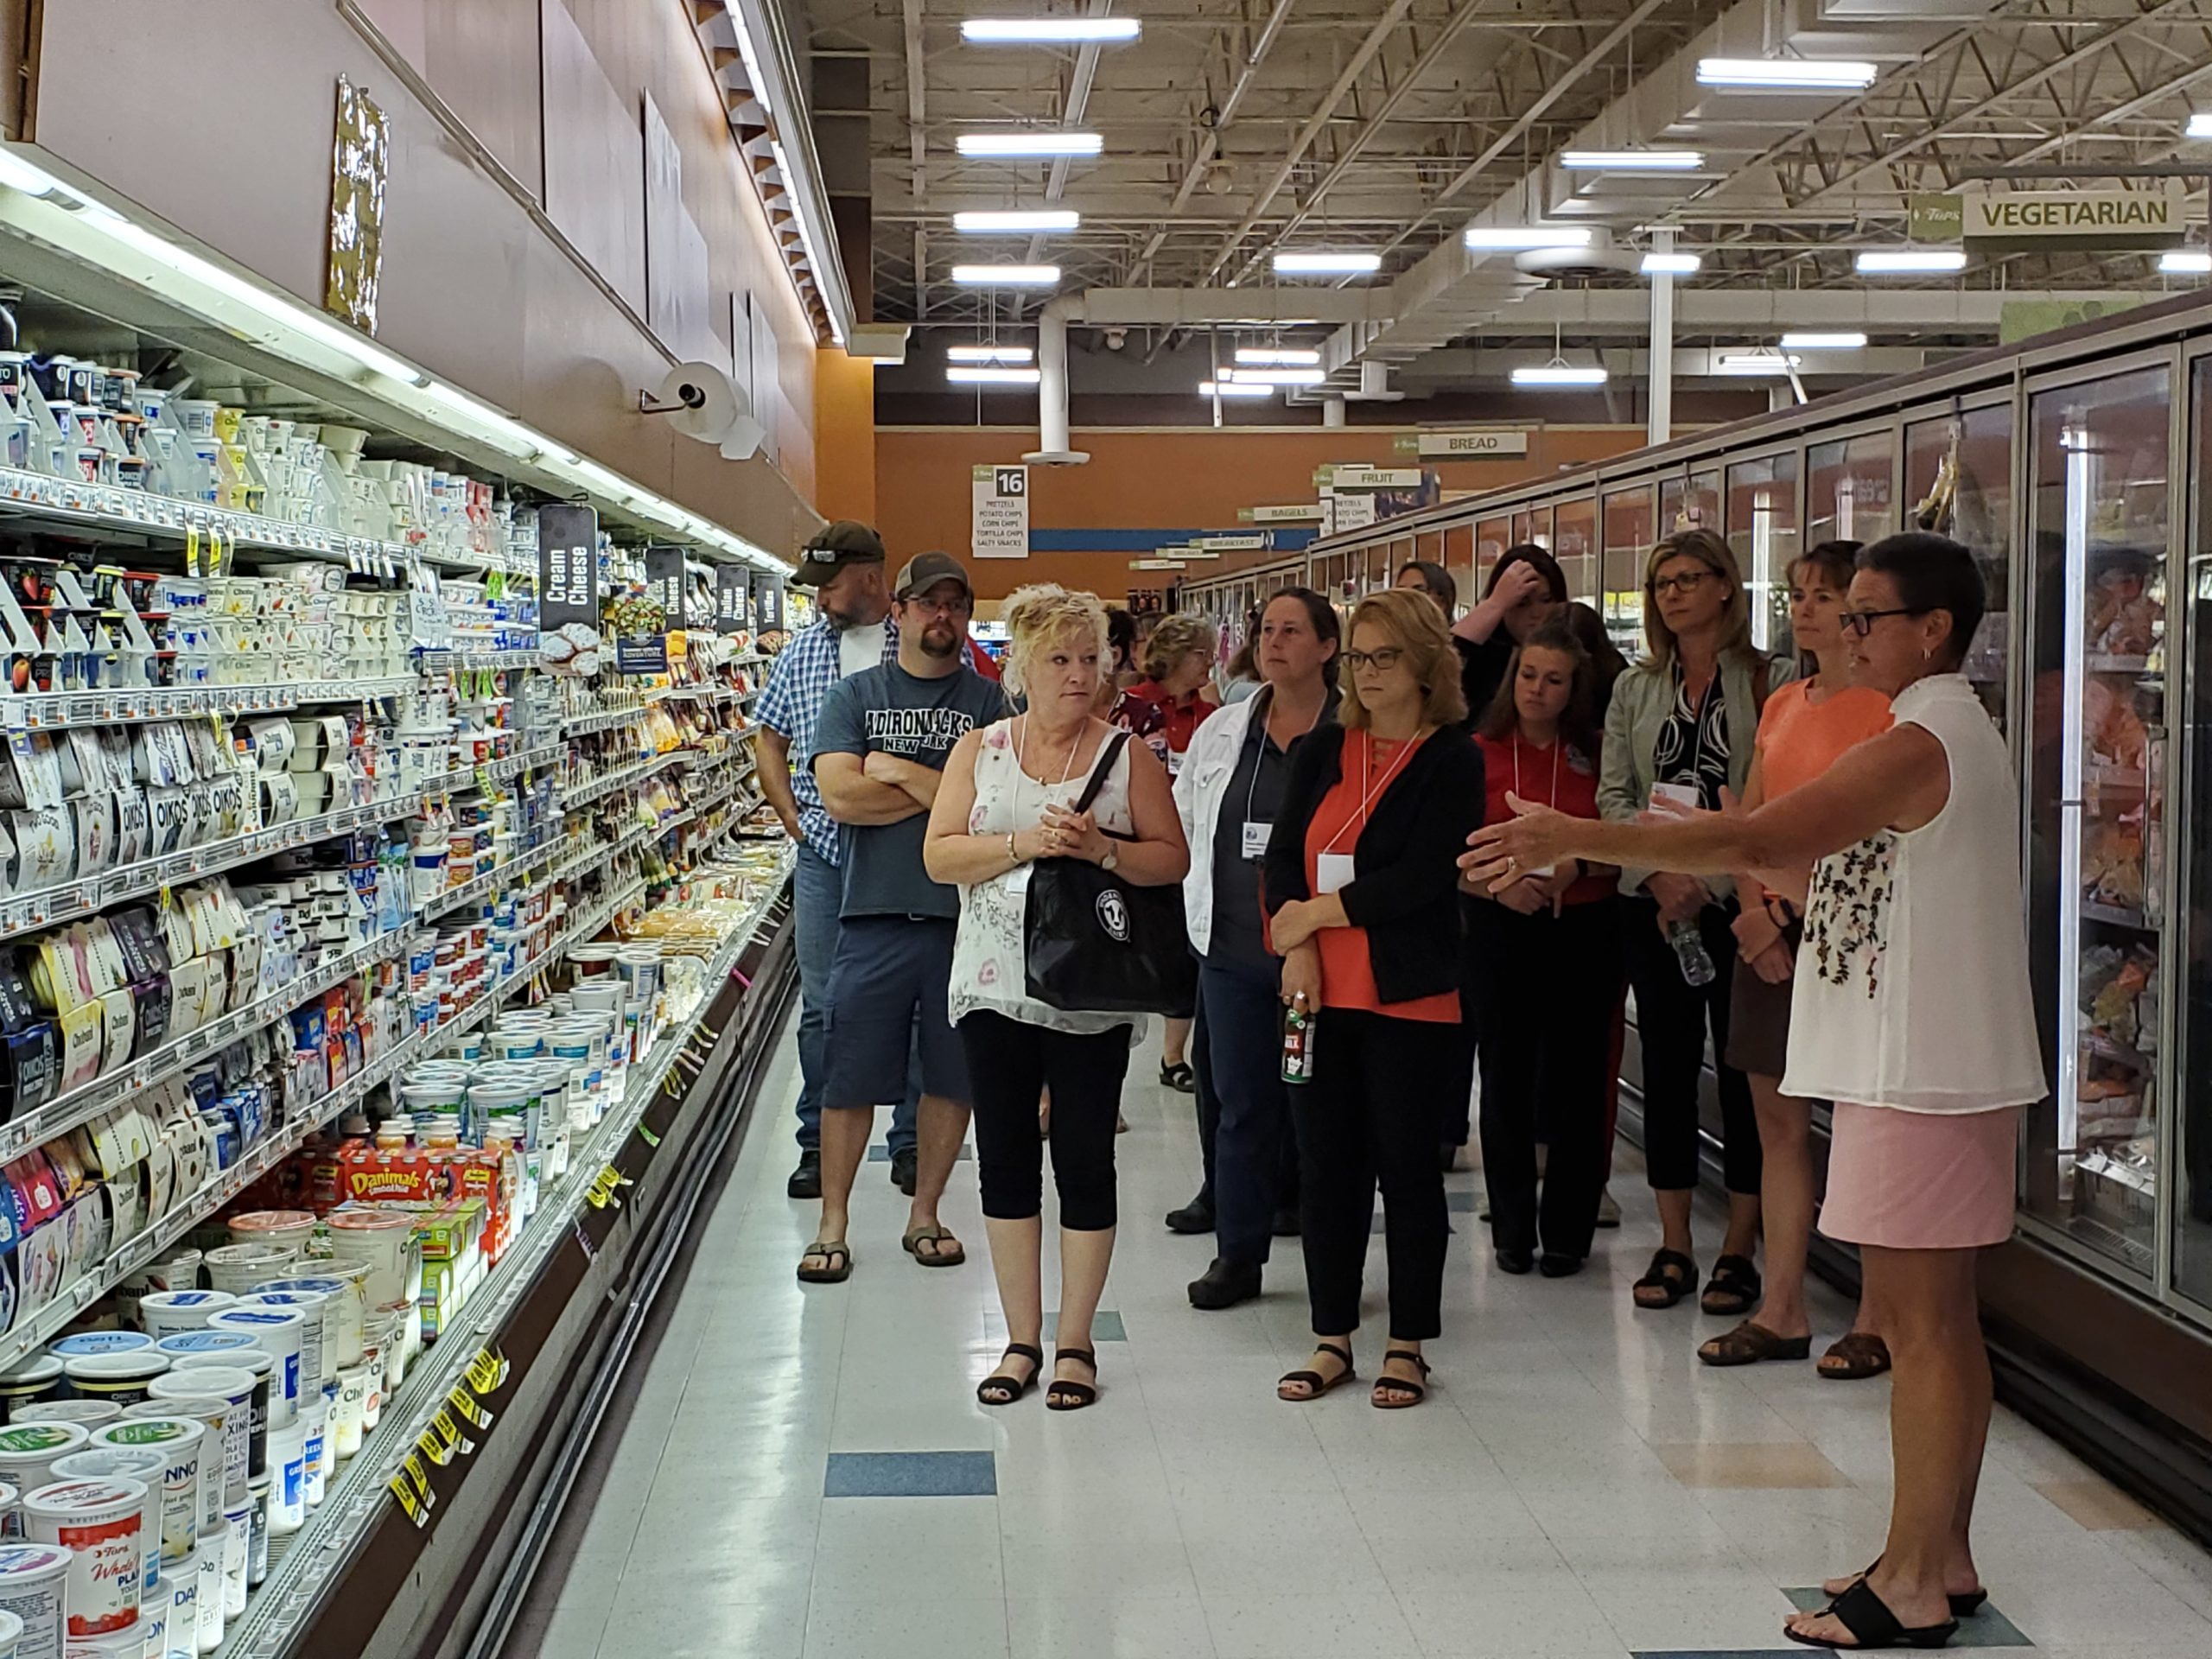 A group of people standing in front of a dairy counter in a supermarket.